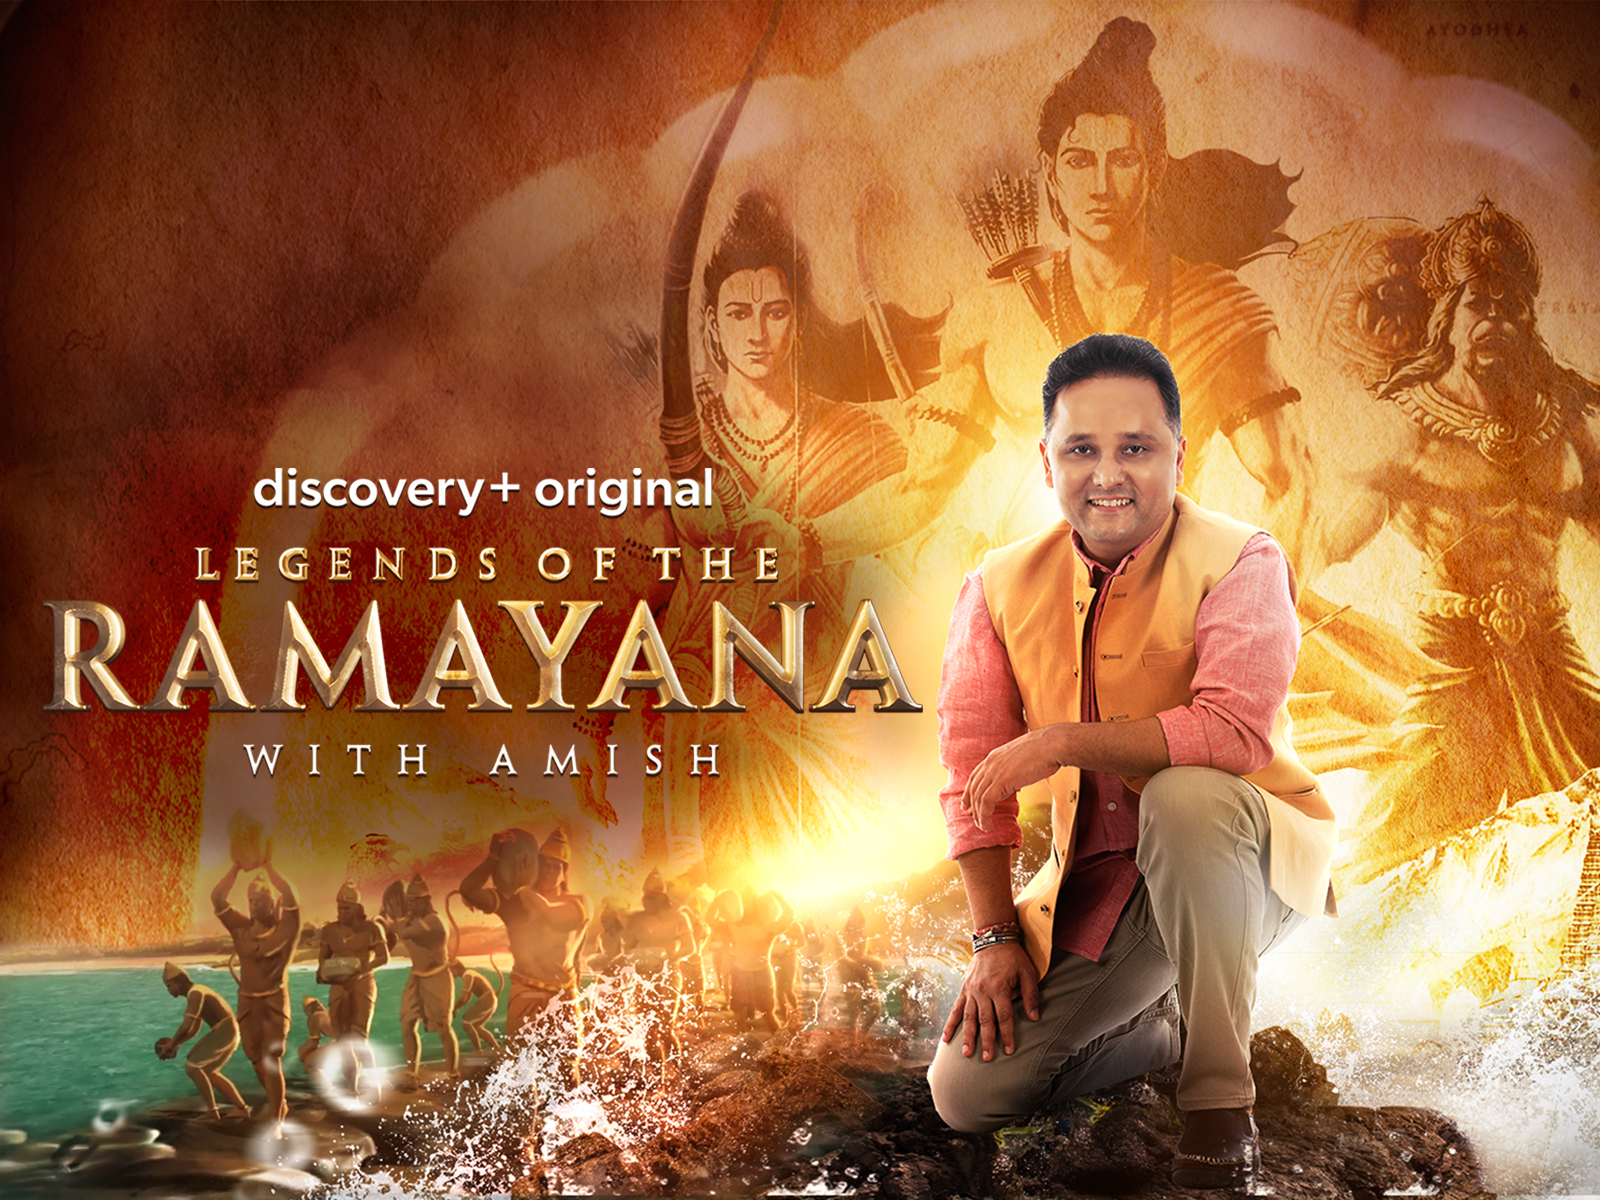 How To Download Legends Of Ramayana With Amish?